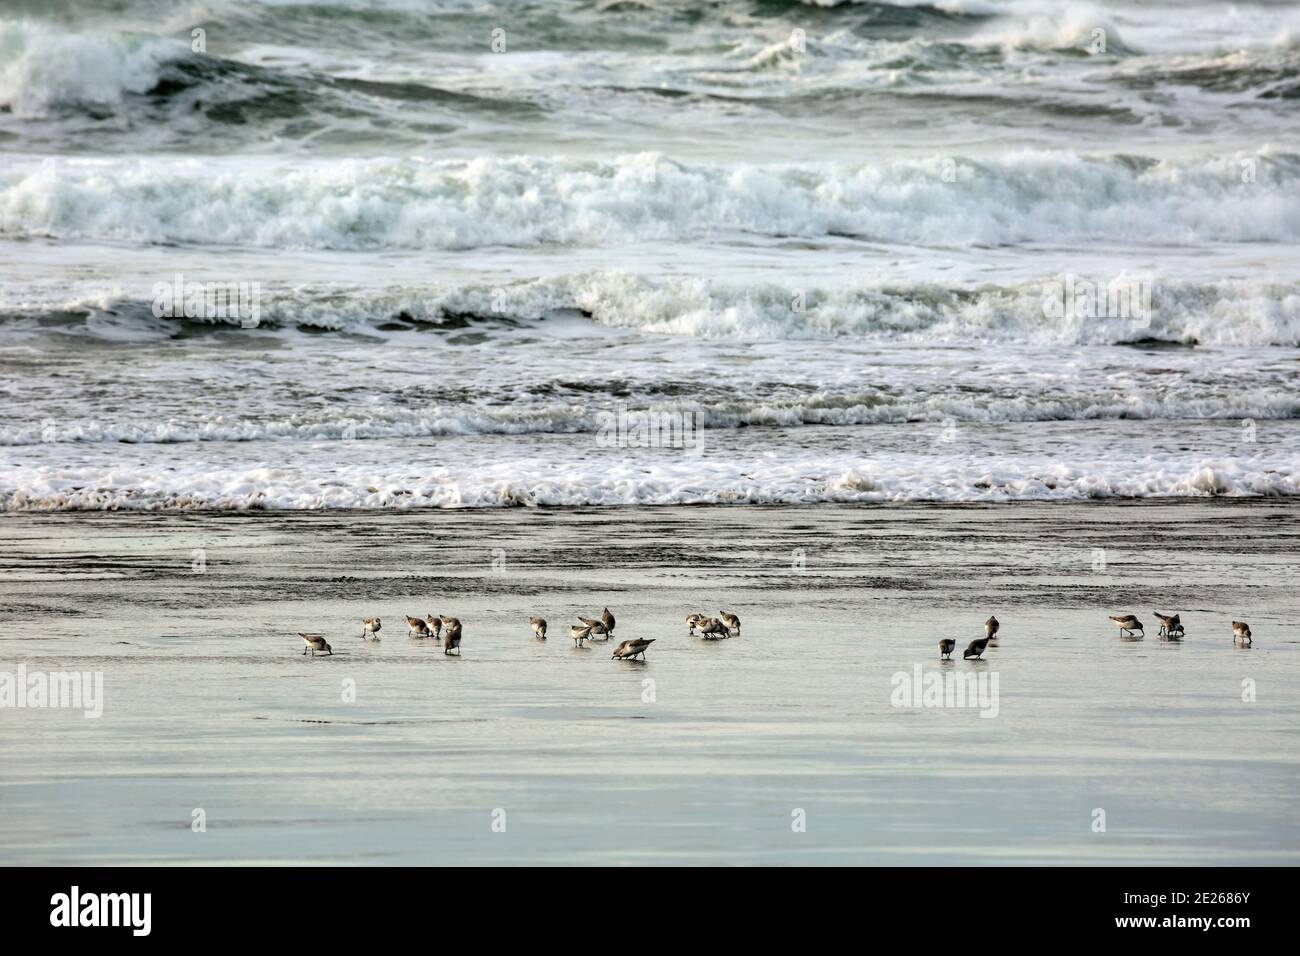 WA19088-00...WASHINGTON - Sandpipers on Benson Beach in Cape Disappointment State Park. Stock Photo